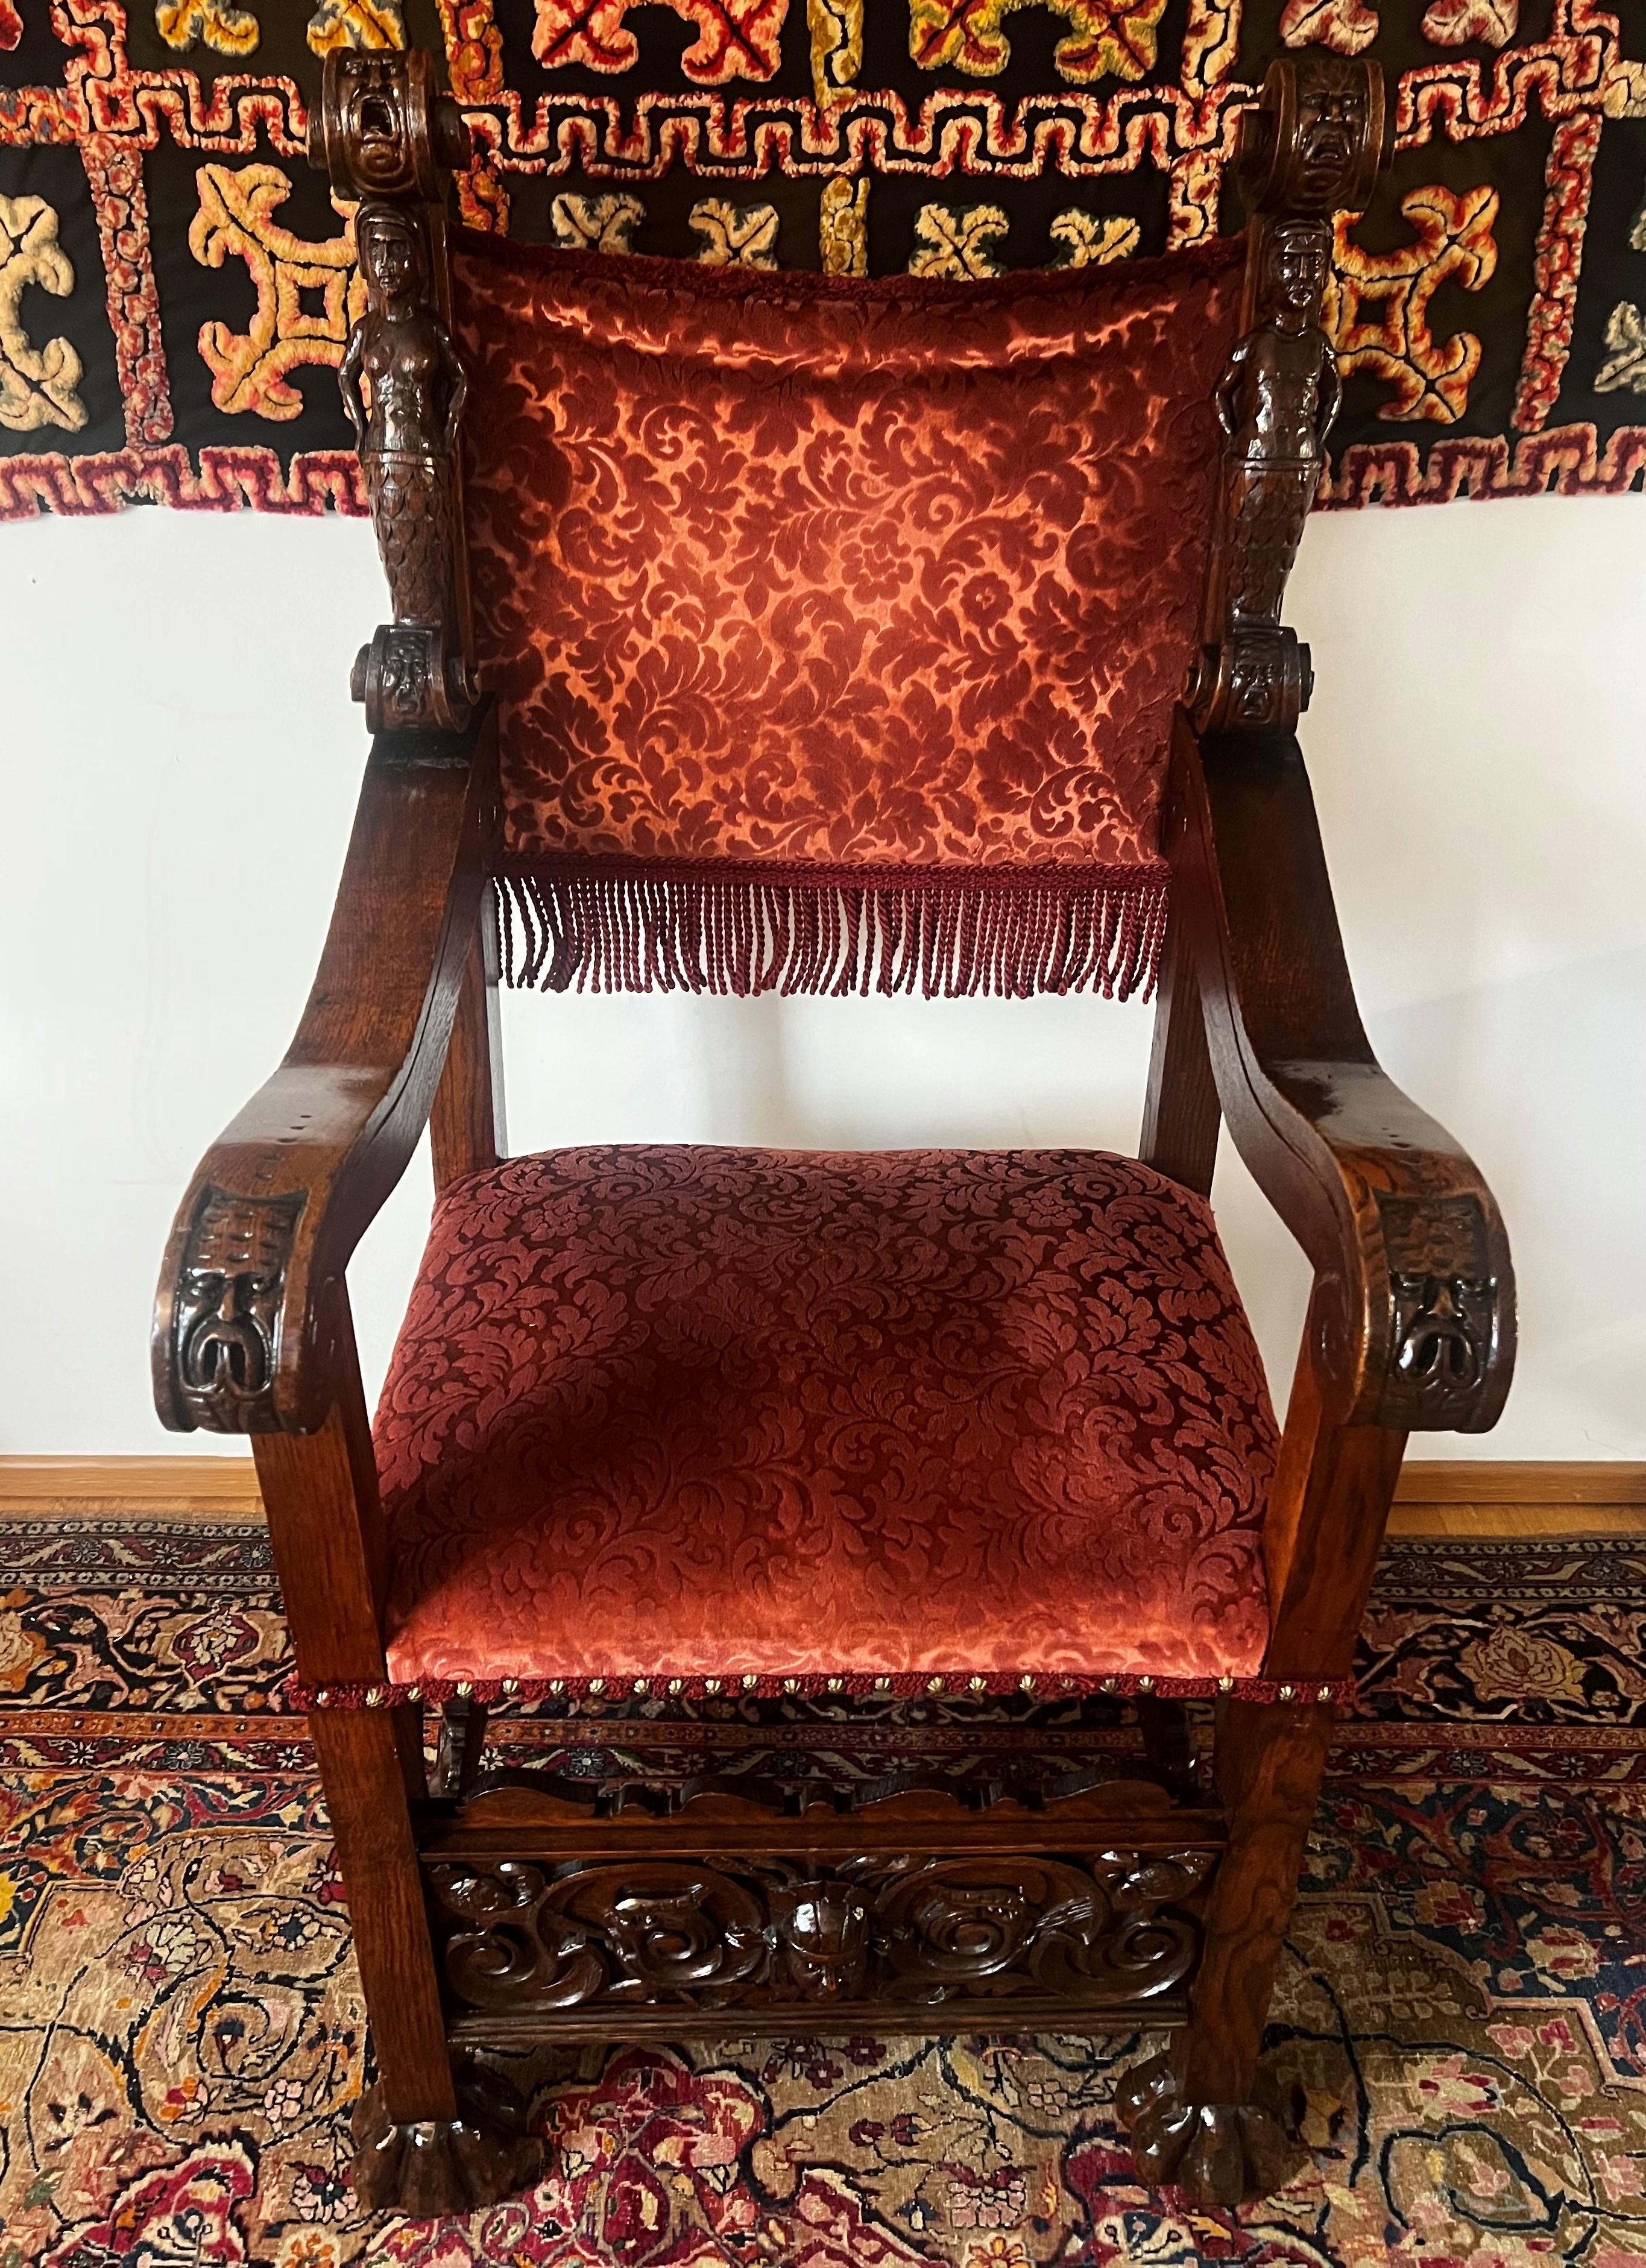 This 18th century British Oak Armchair is an absolutely unique piece of furniture. It has a very unusual mythological design which dedicated to the Sea. This Throne Armchair looks truly magnificent and royal with its perfectly carved Mermaid and